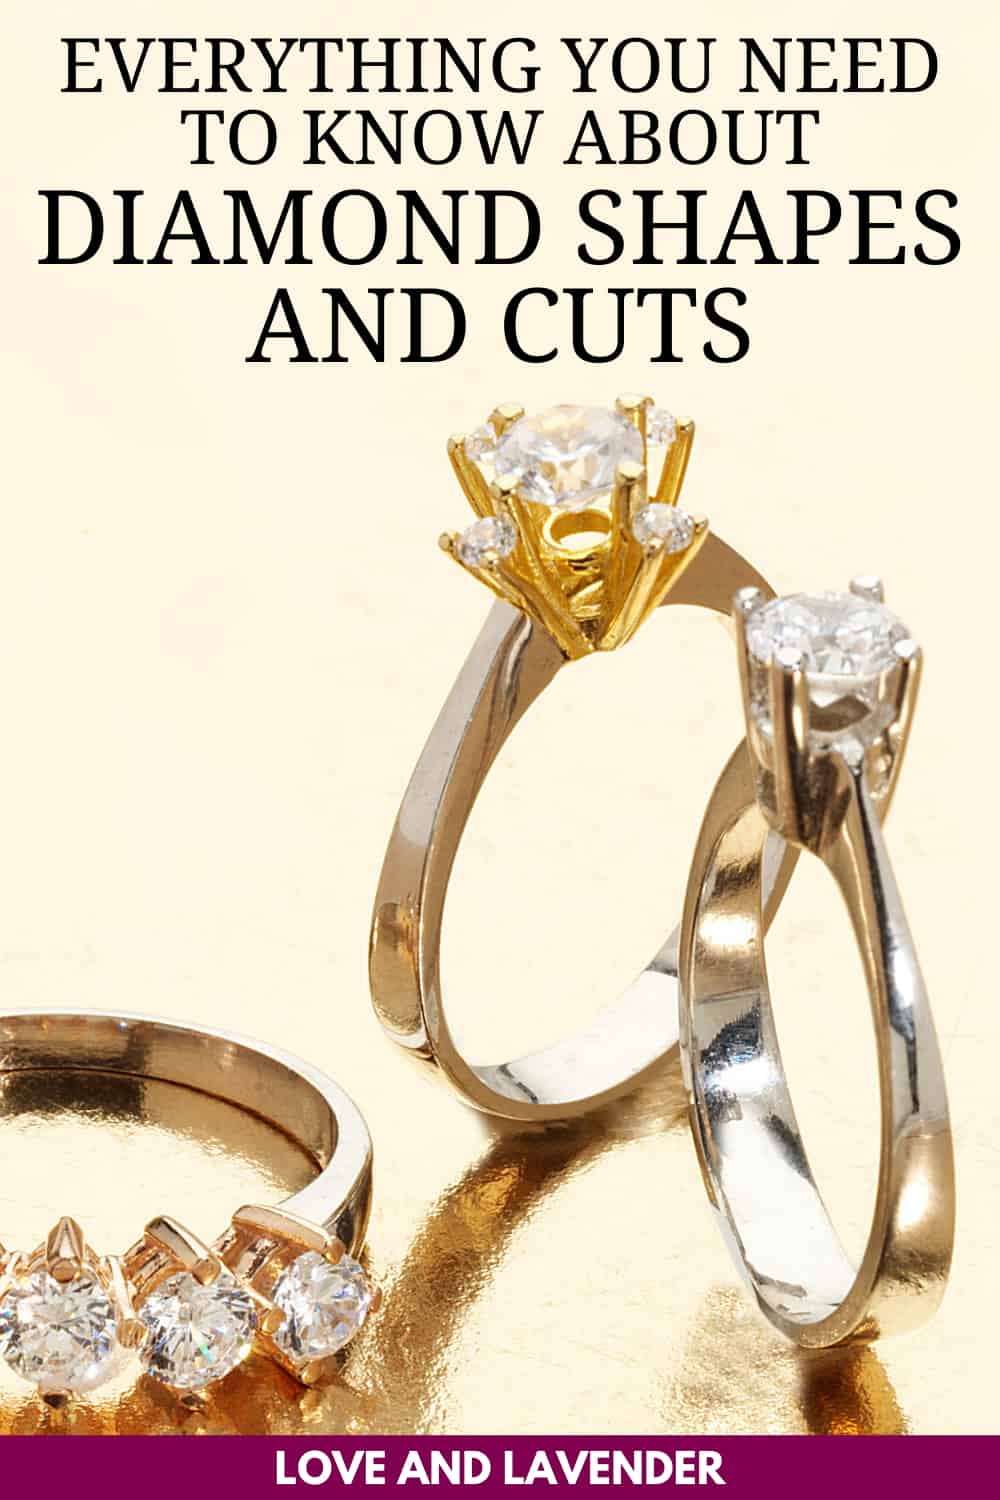 The Complete Guide to Diamond Shapes - Pinterest pin